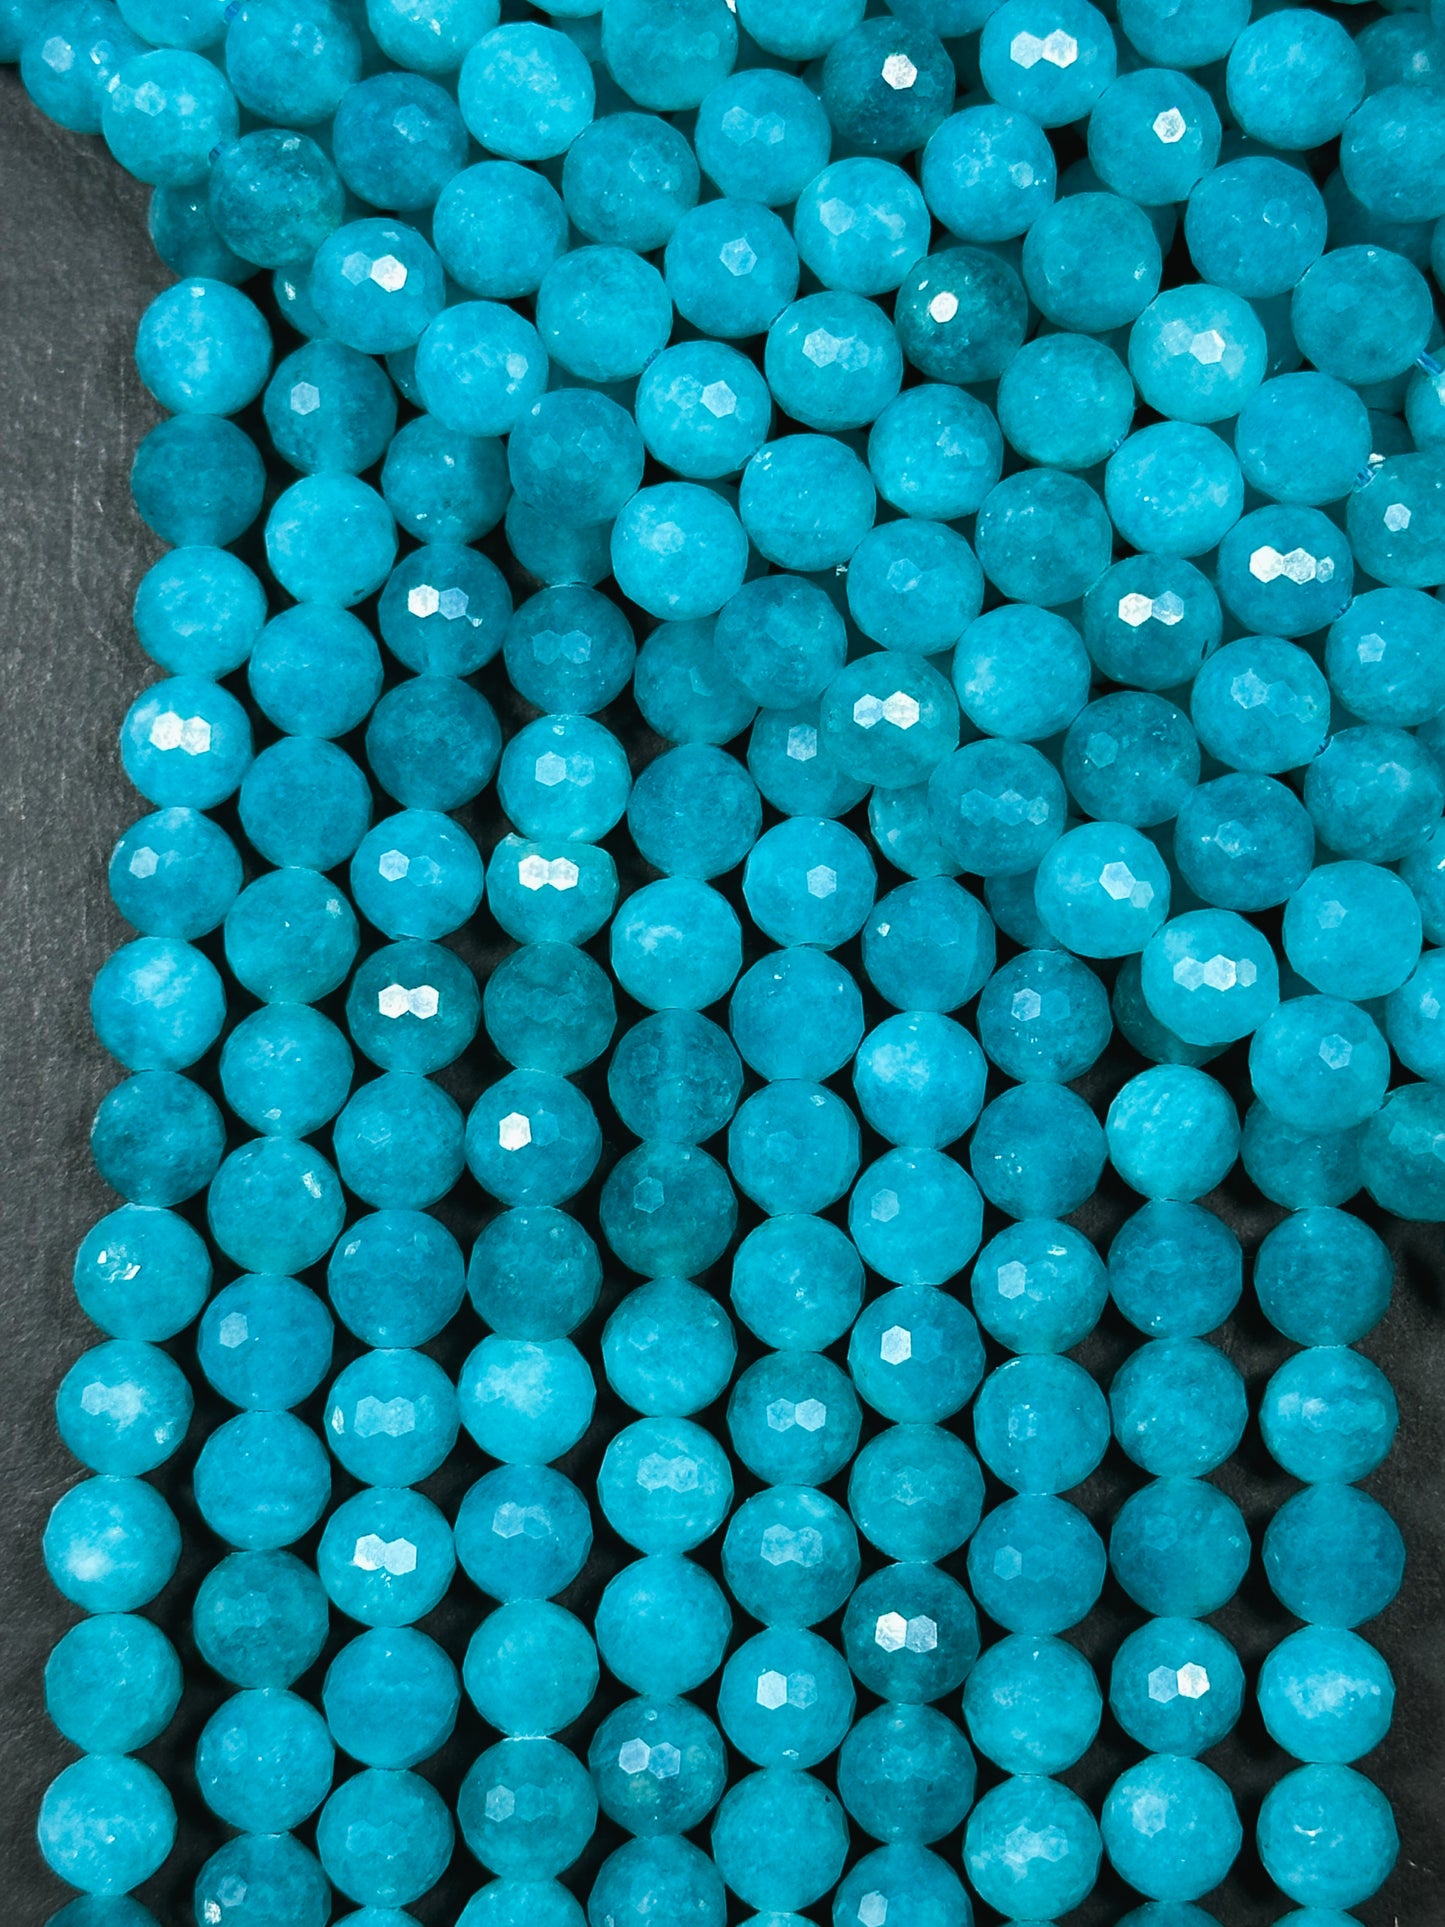 Natural Amazonite Quartz Gemstone Bead Faceted 6mm 8mm 10mm Round Beads, Beautiful Blue Color Amazonite Bead Great Quality Full Strand 15.5"